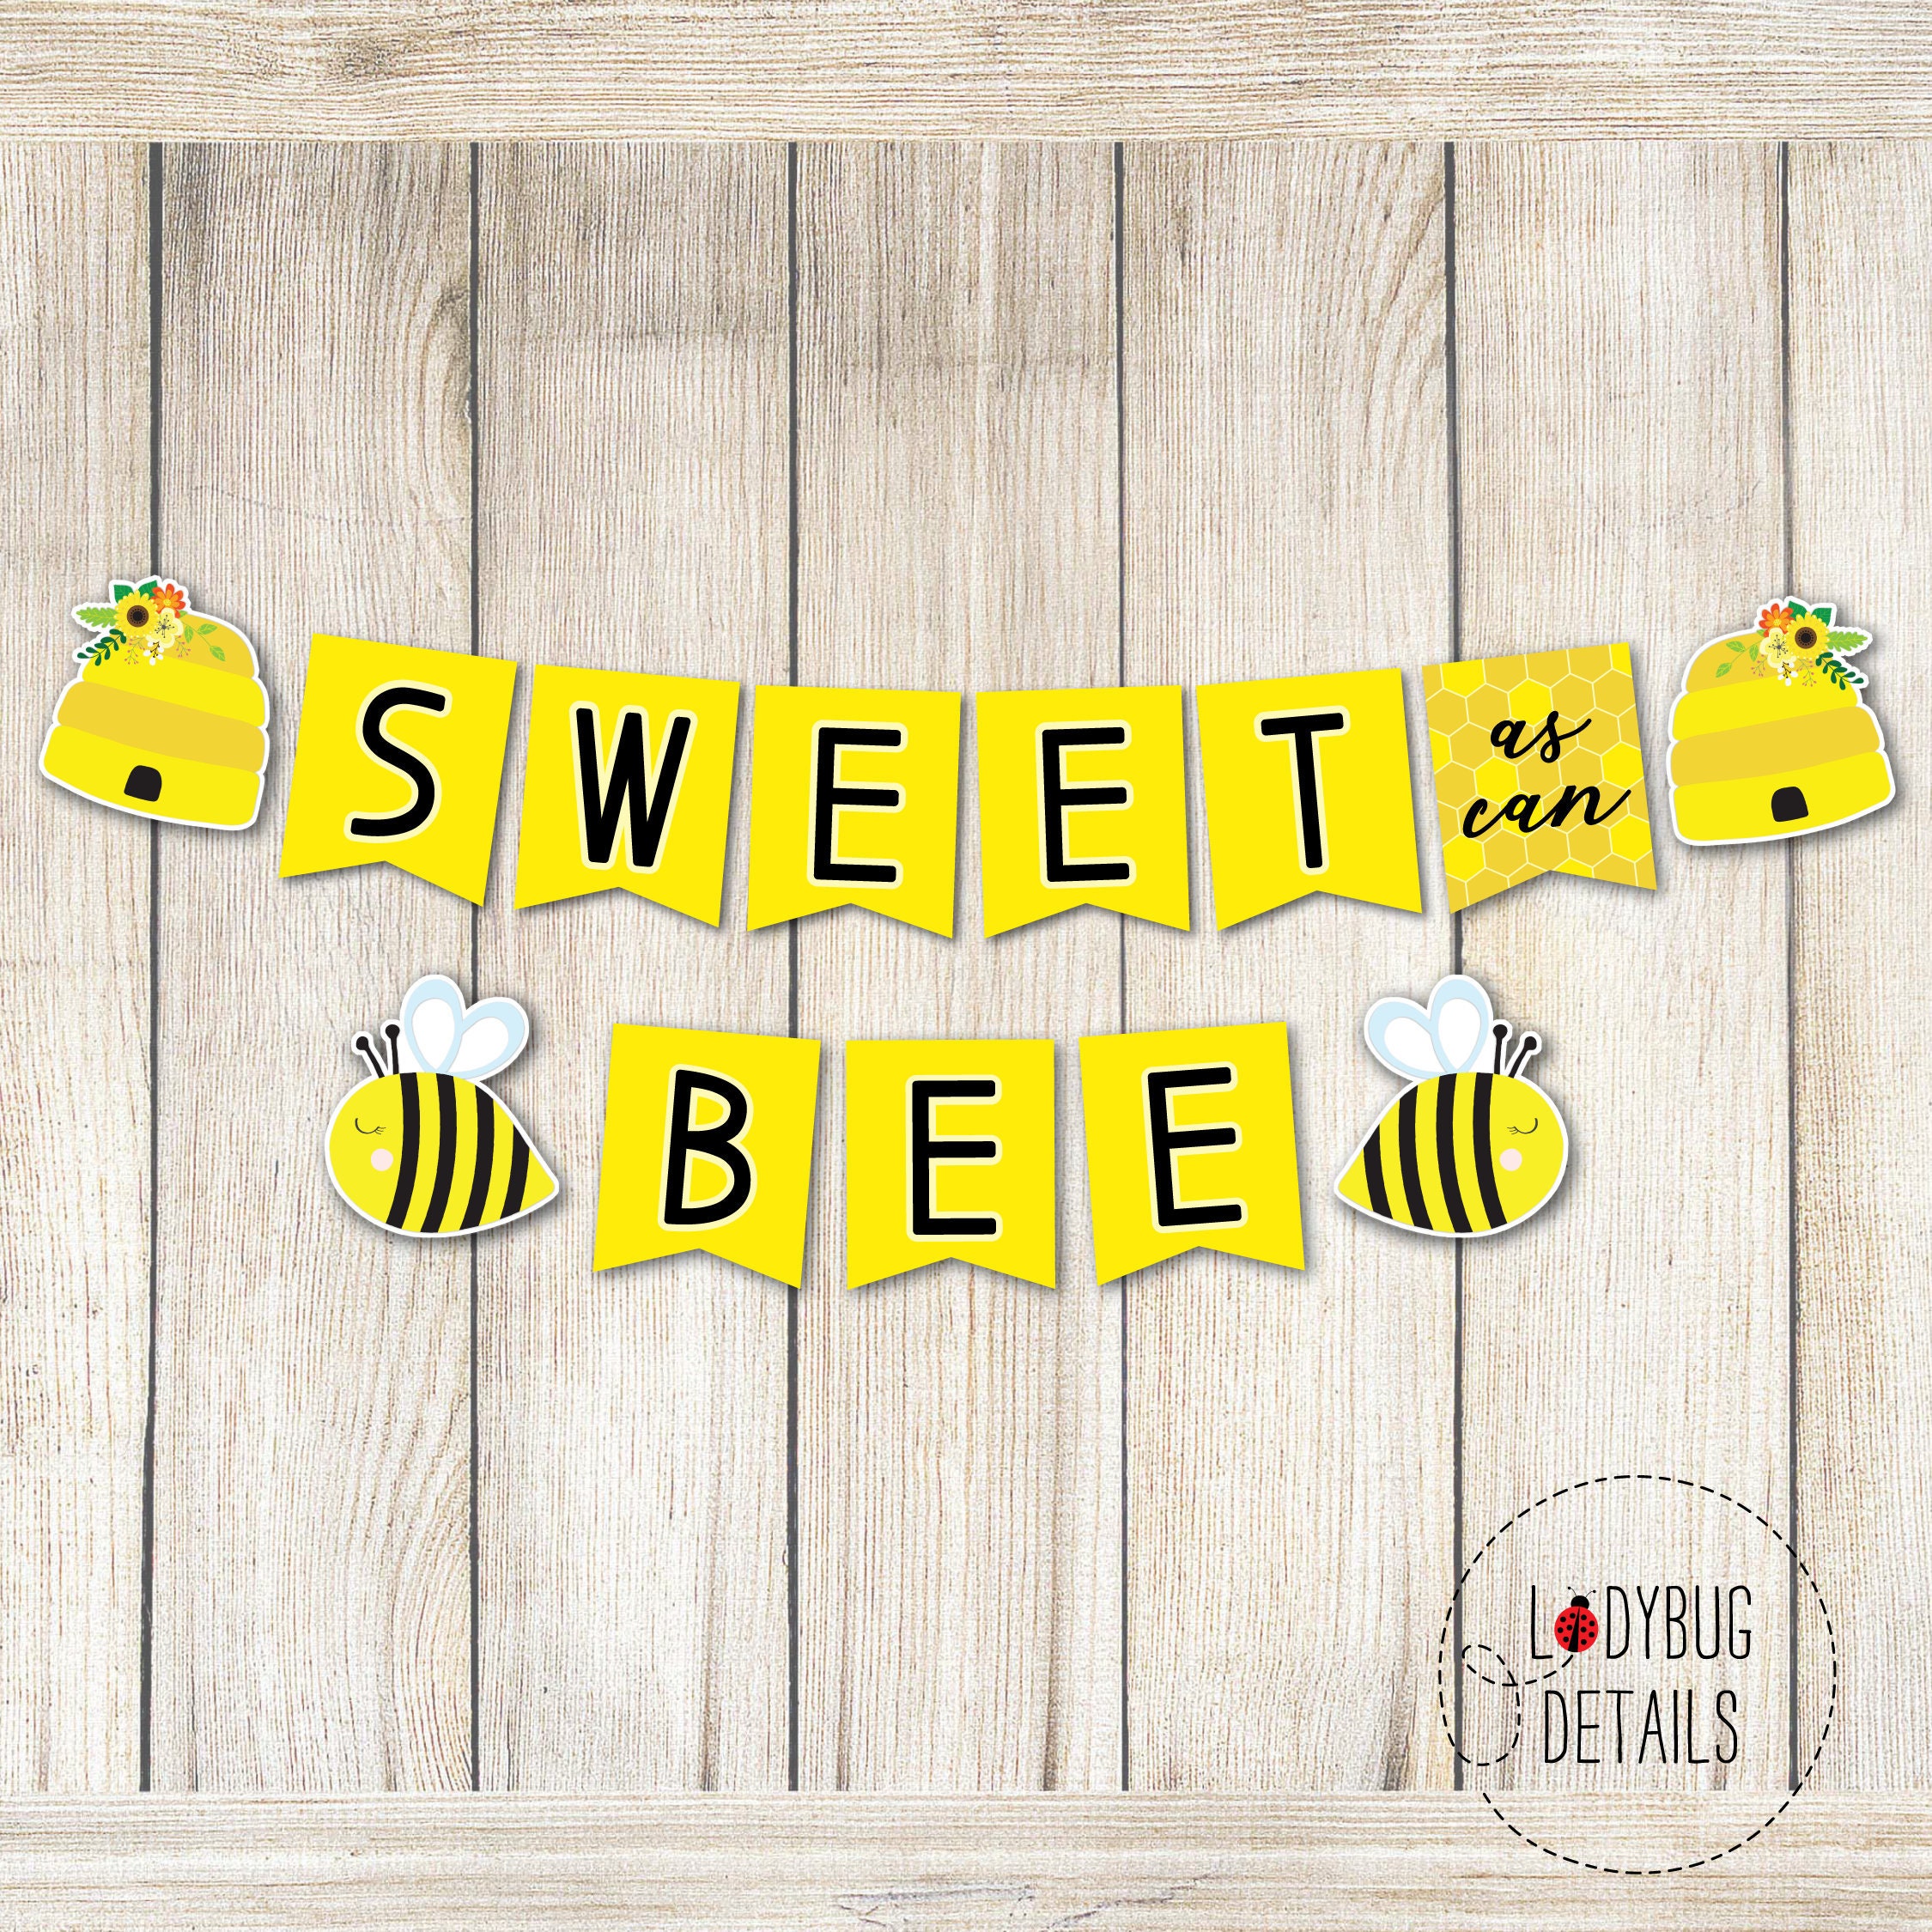 12 Bumble Bee and Bee Hive Cupcake Toppers/ Happy Bee Day/ What Will It Be  Baby Shower Decor/ Mommy to Bee 